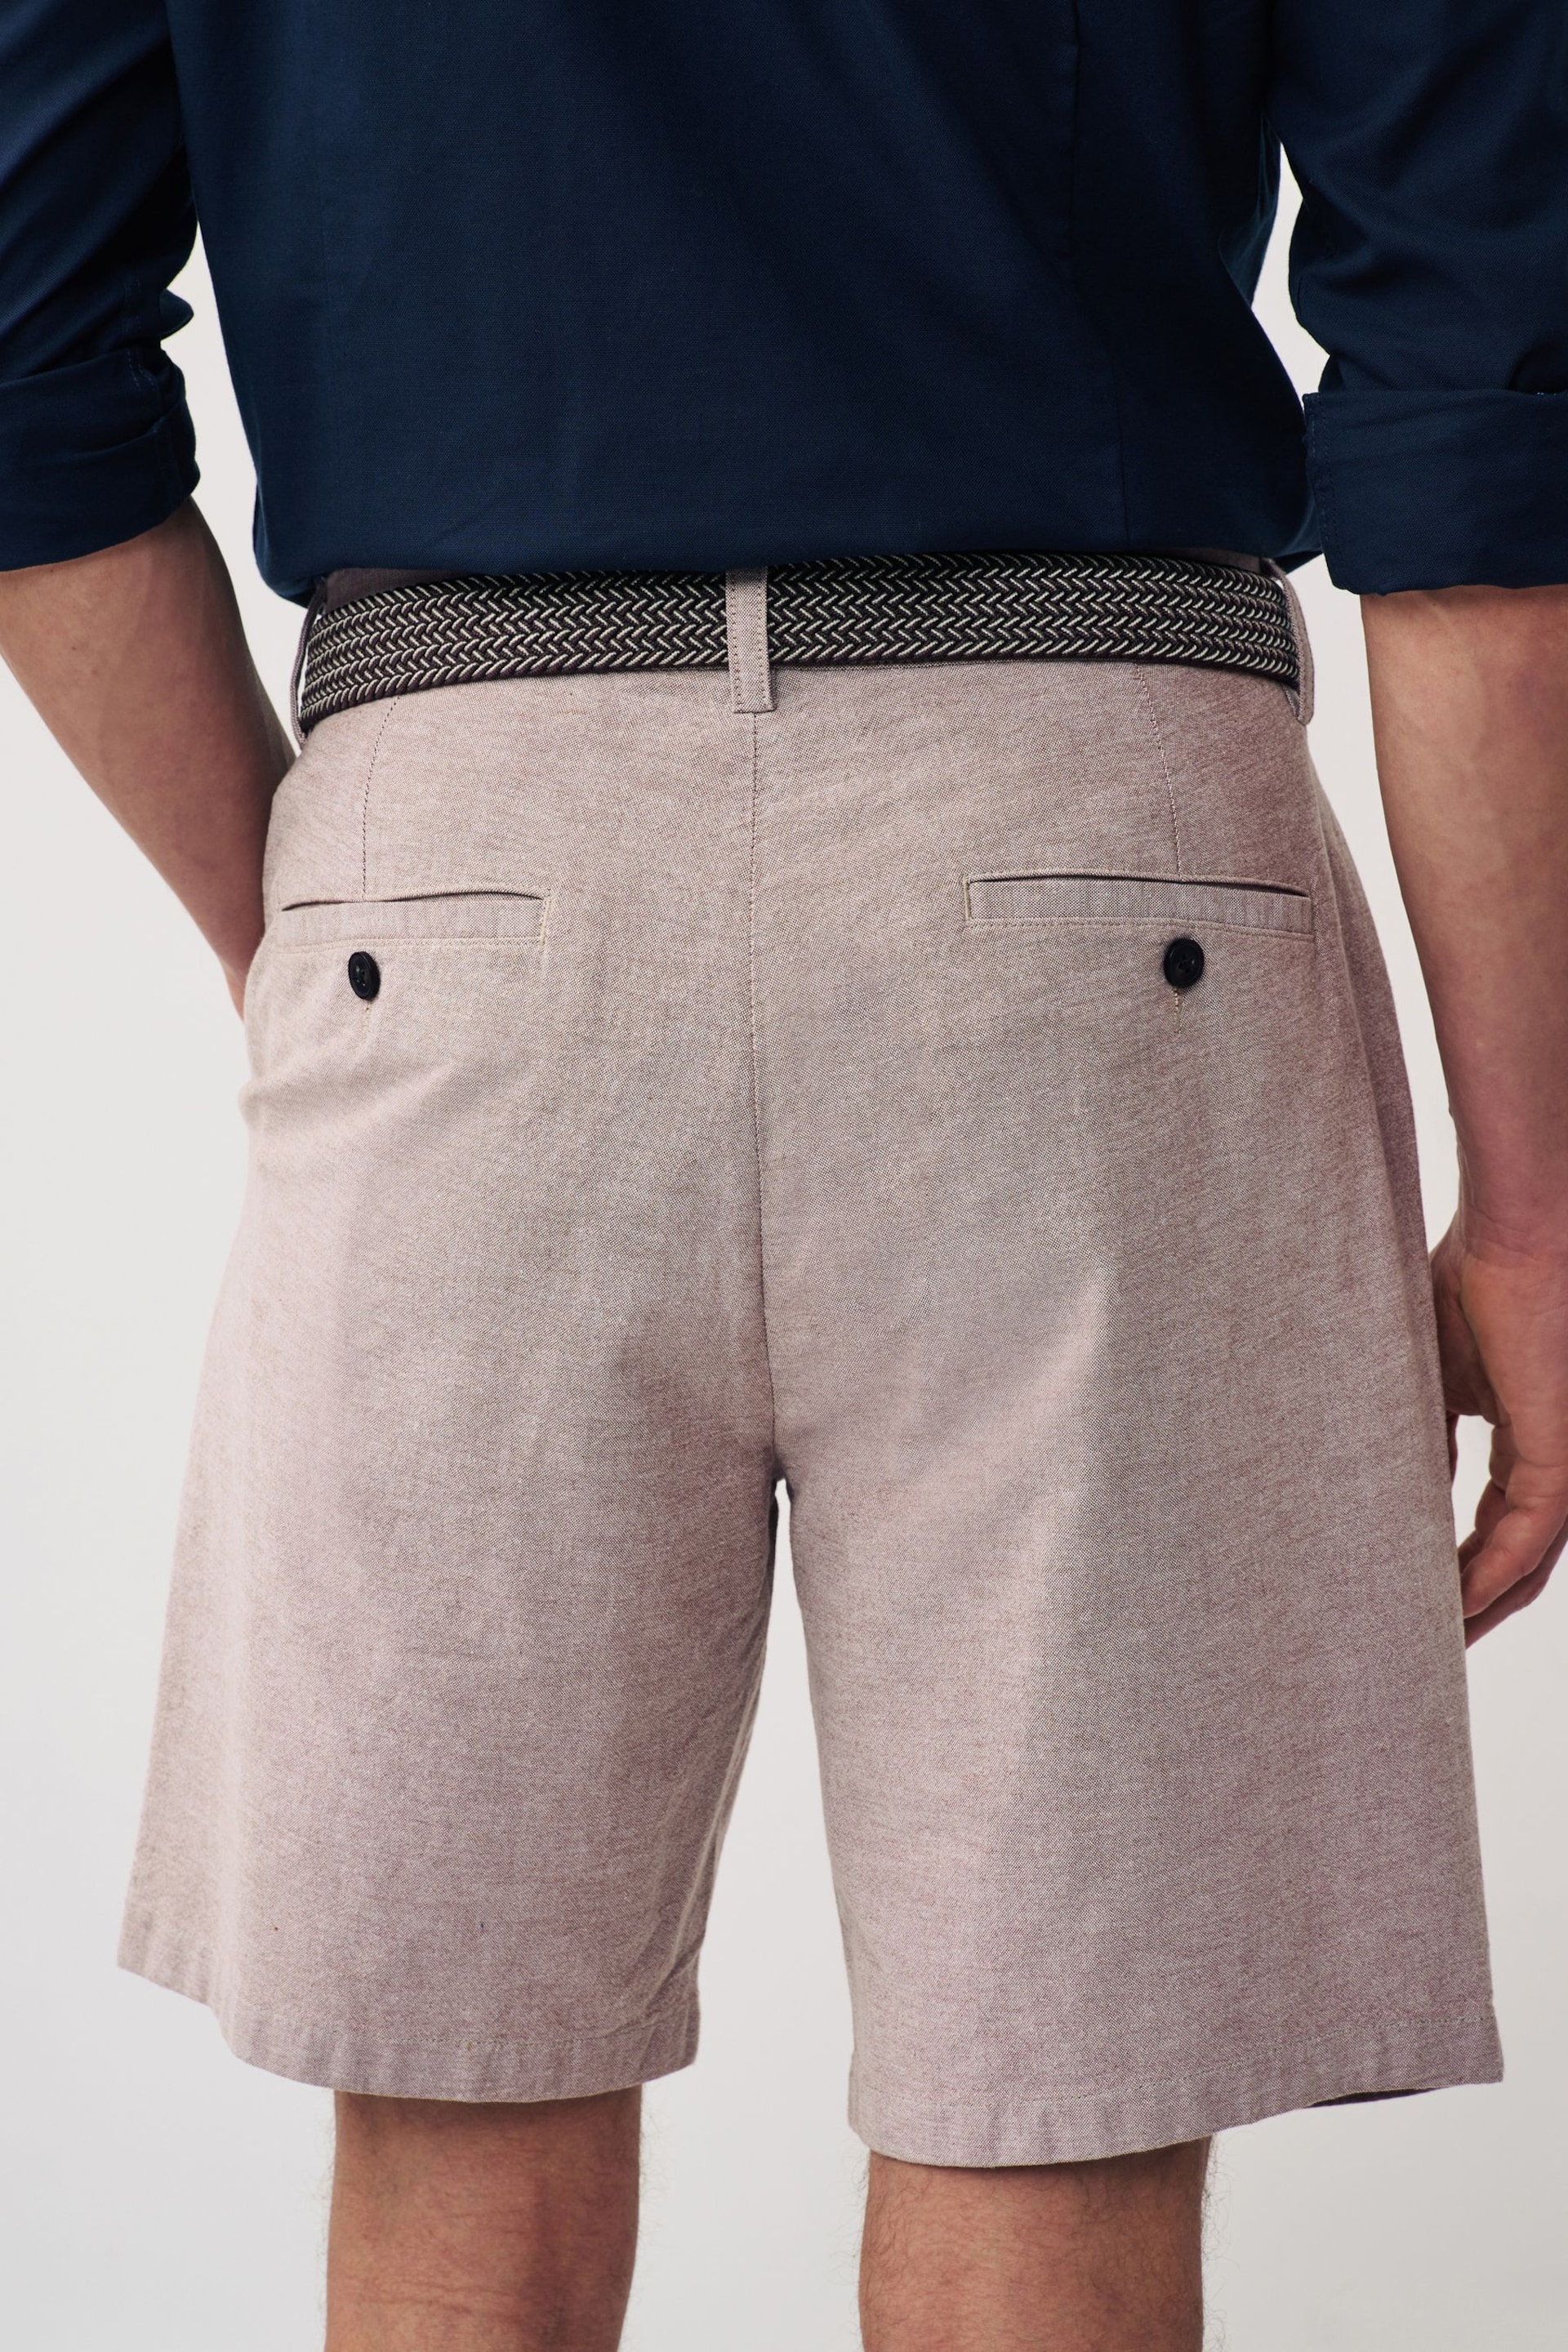 Clay Cotton Oxford Chino Shorts with Belt Included - Image 3 of 7